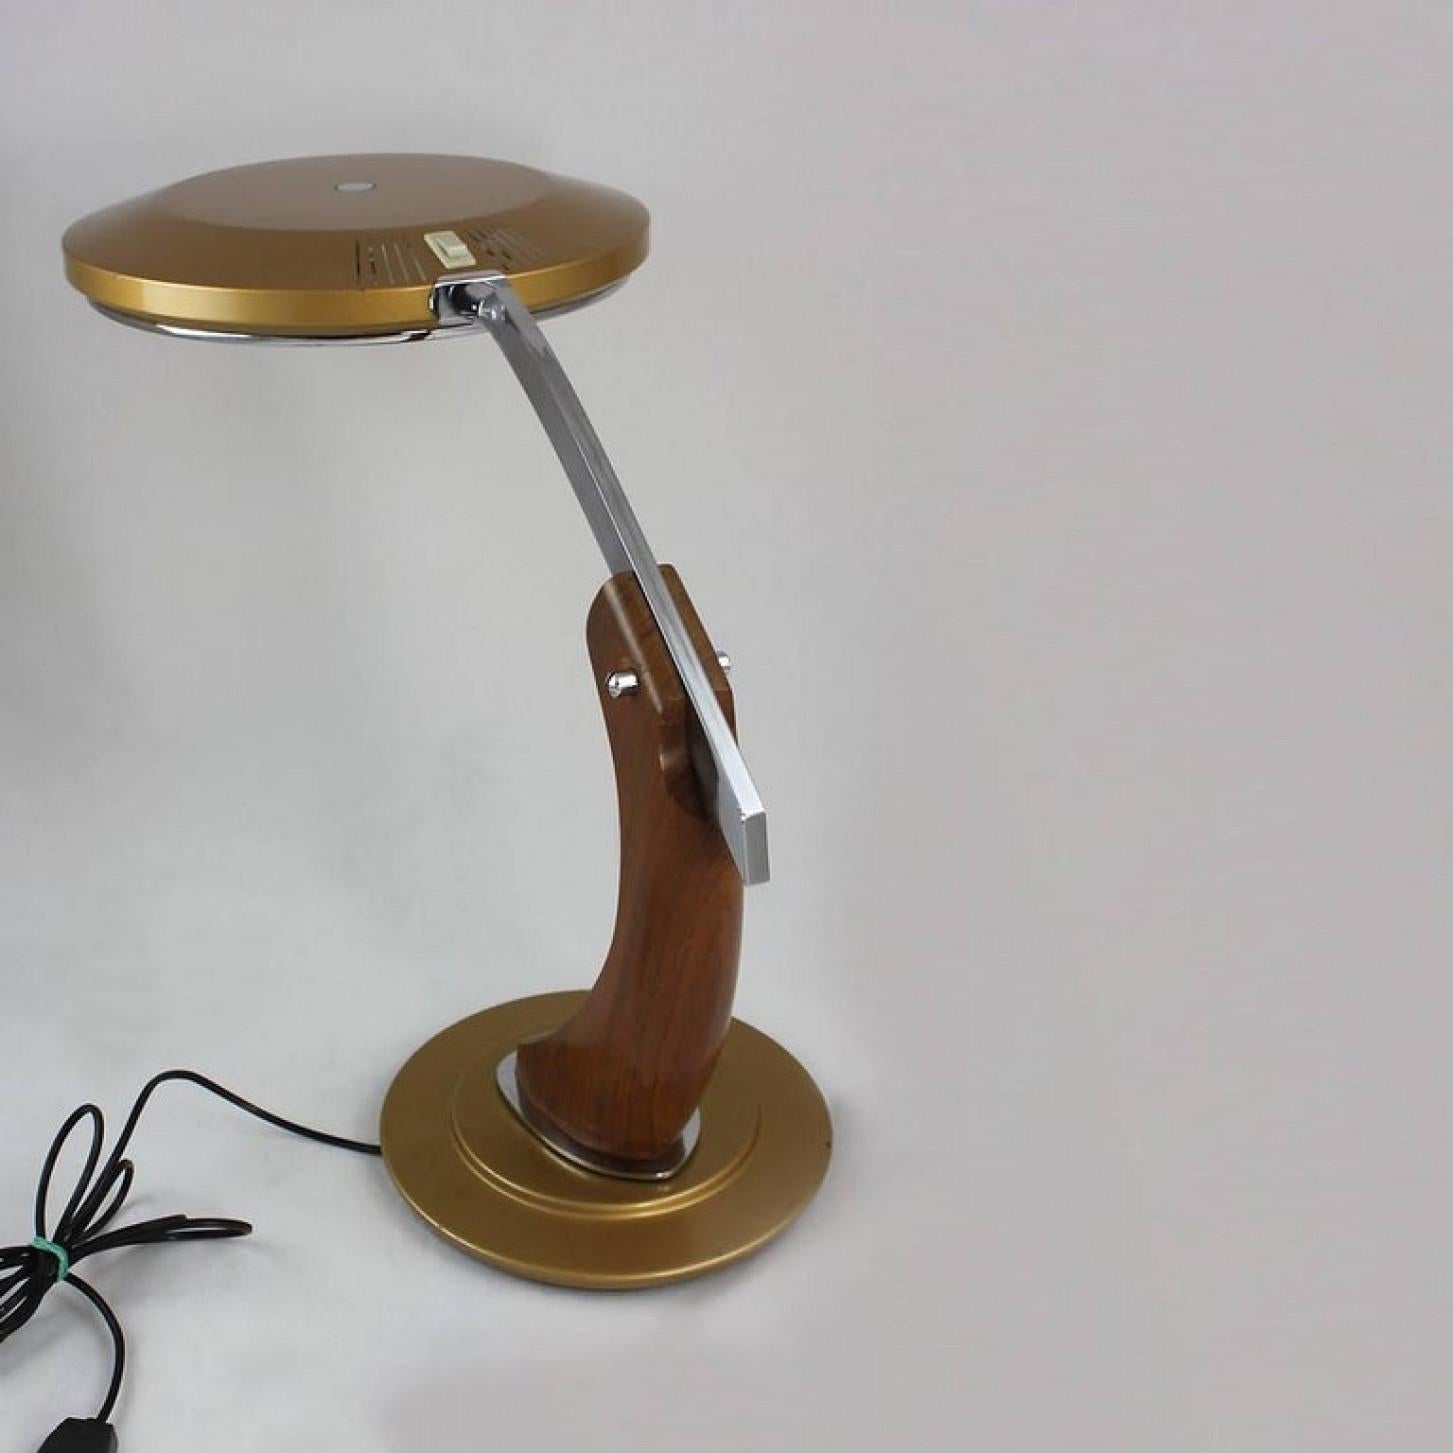 Other Fase Madrid Midcentury Oak and Gold Desk Lamp, 1960s (Copy) For Sale